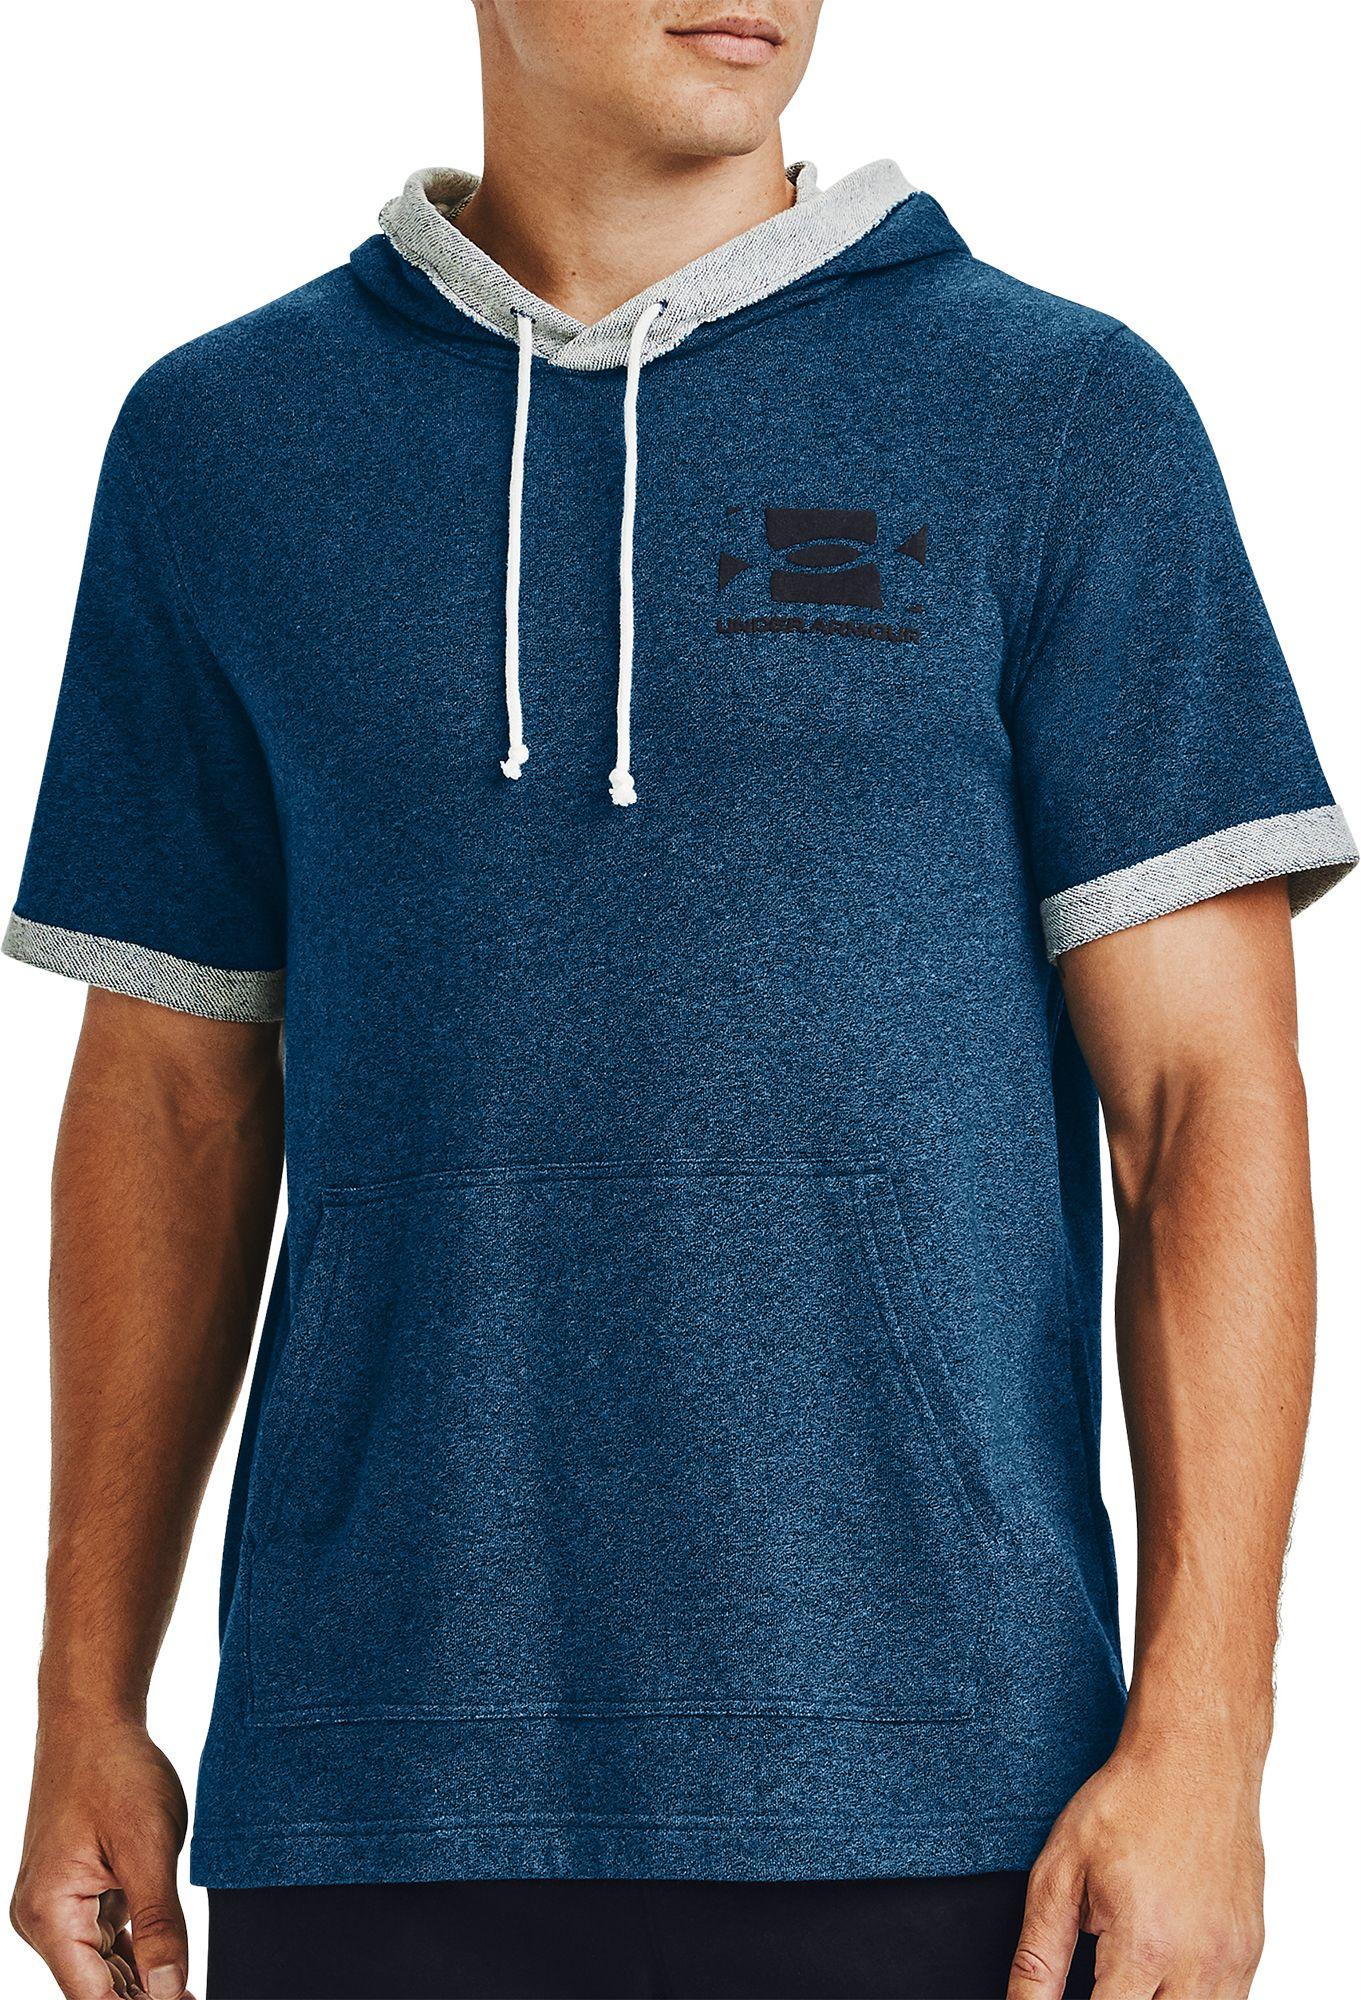 Under Armour Sportstyle Terry Short Sleeve Hoodie in Blue for Men - Lyst